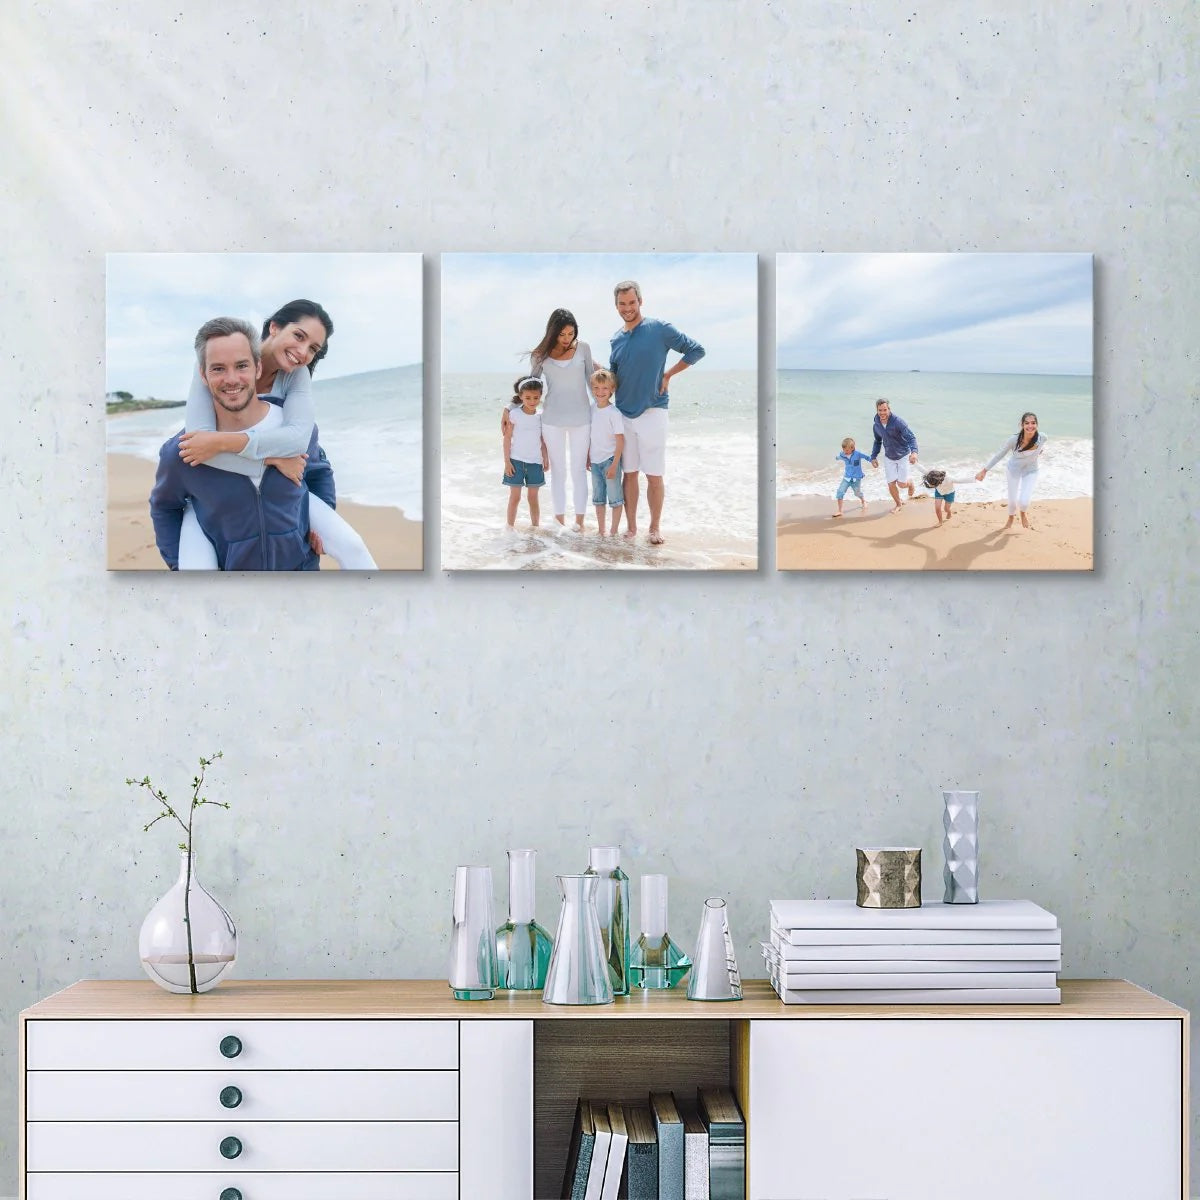 How to Transform Your Walls with Photo Tiles